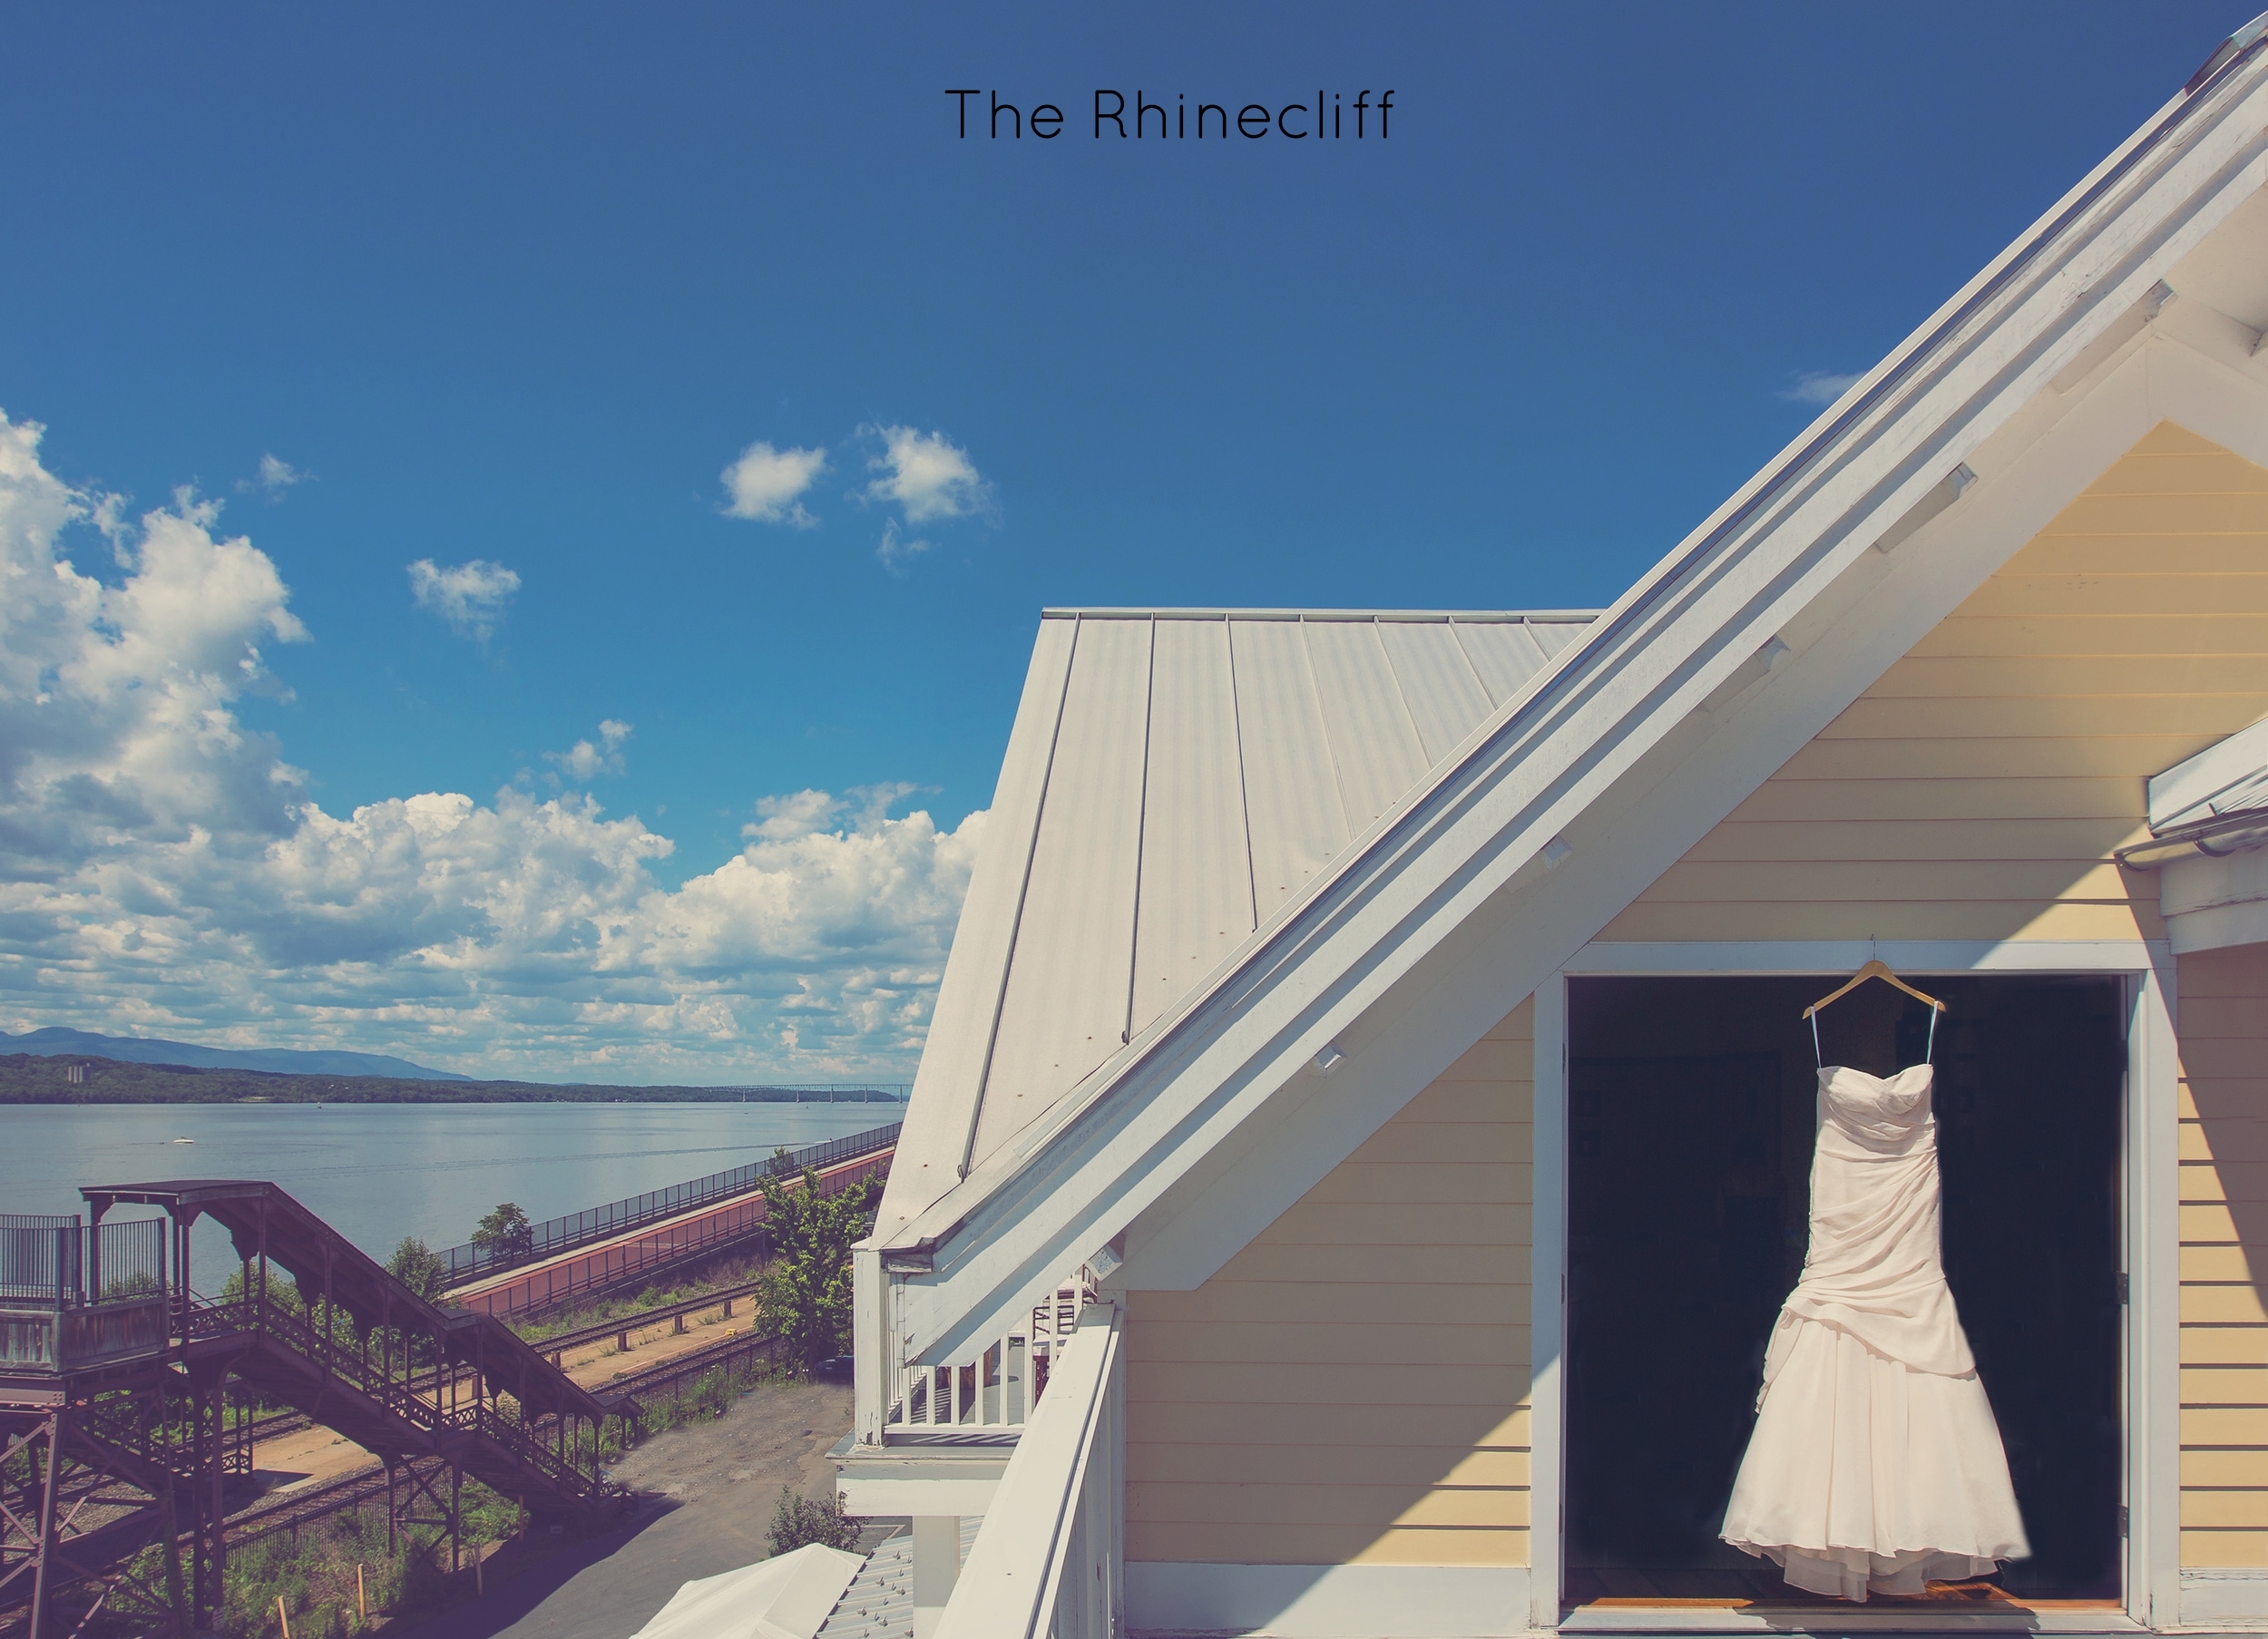 The Rhinecliff